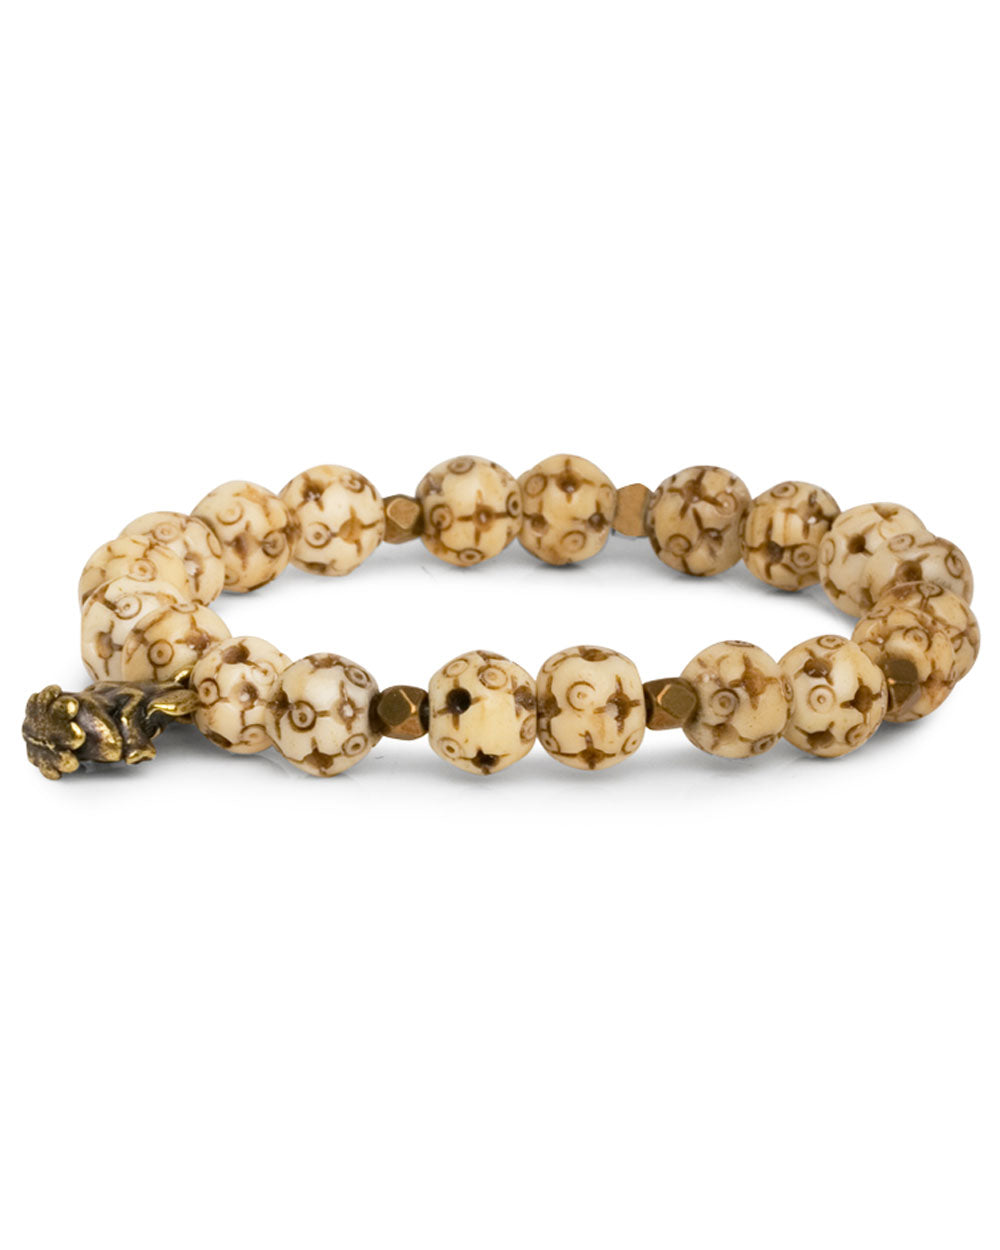 Carved Tea-Stained Bone and Brass Beaded Bracelet